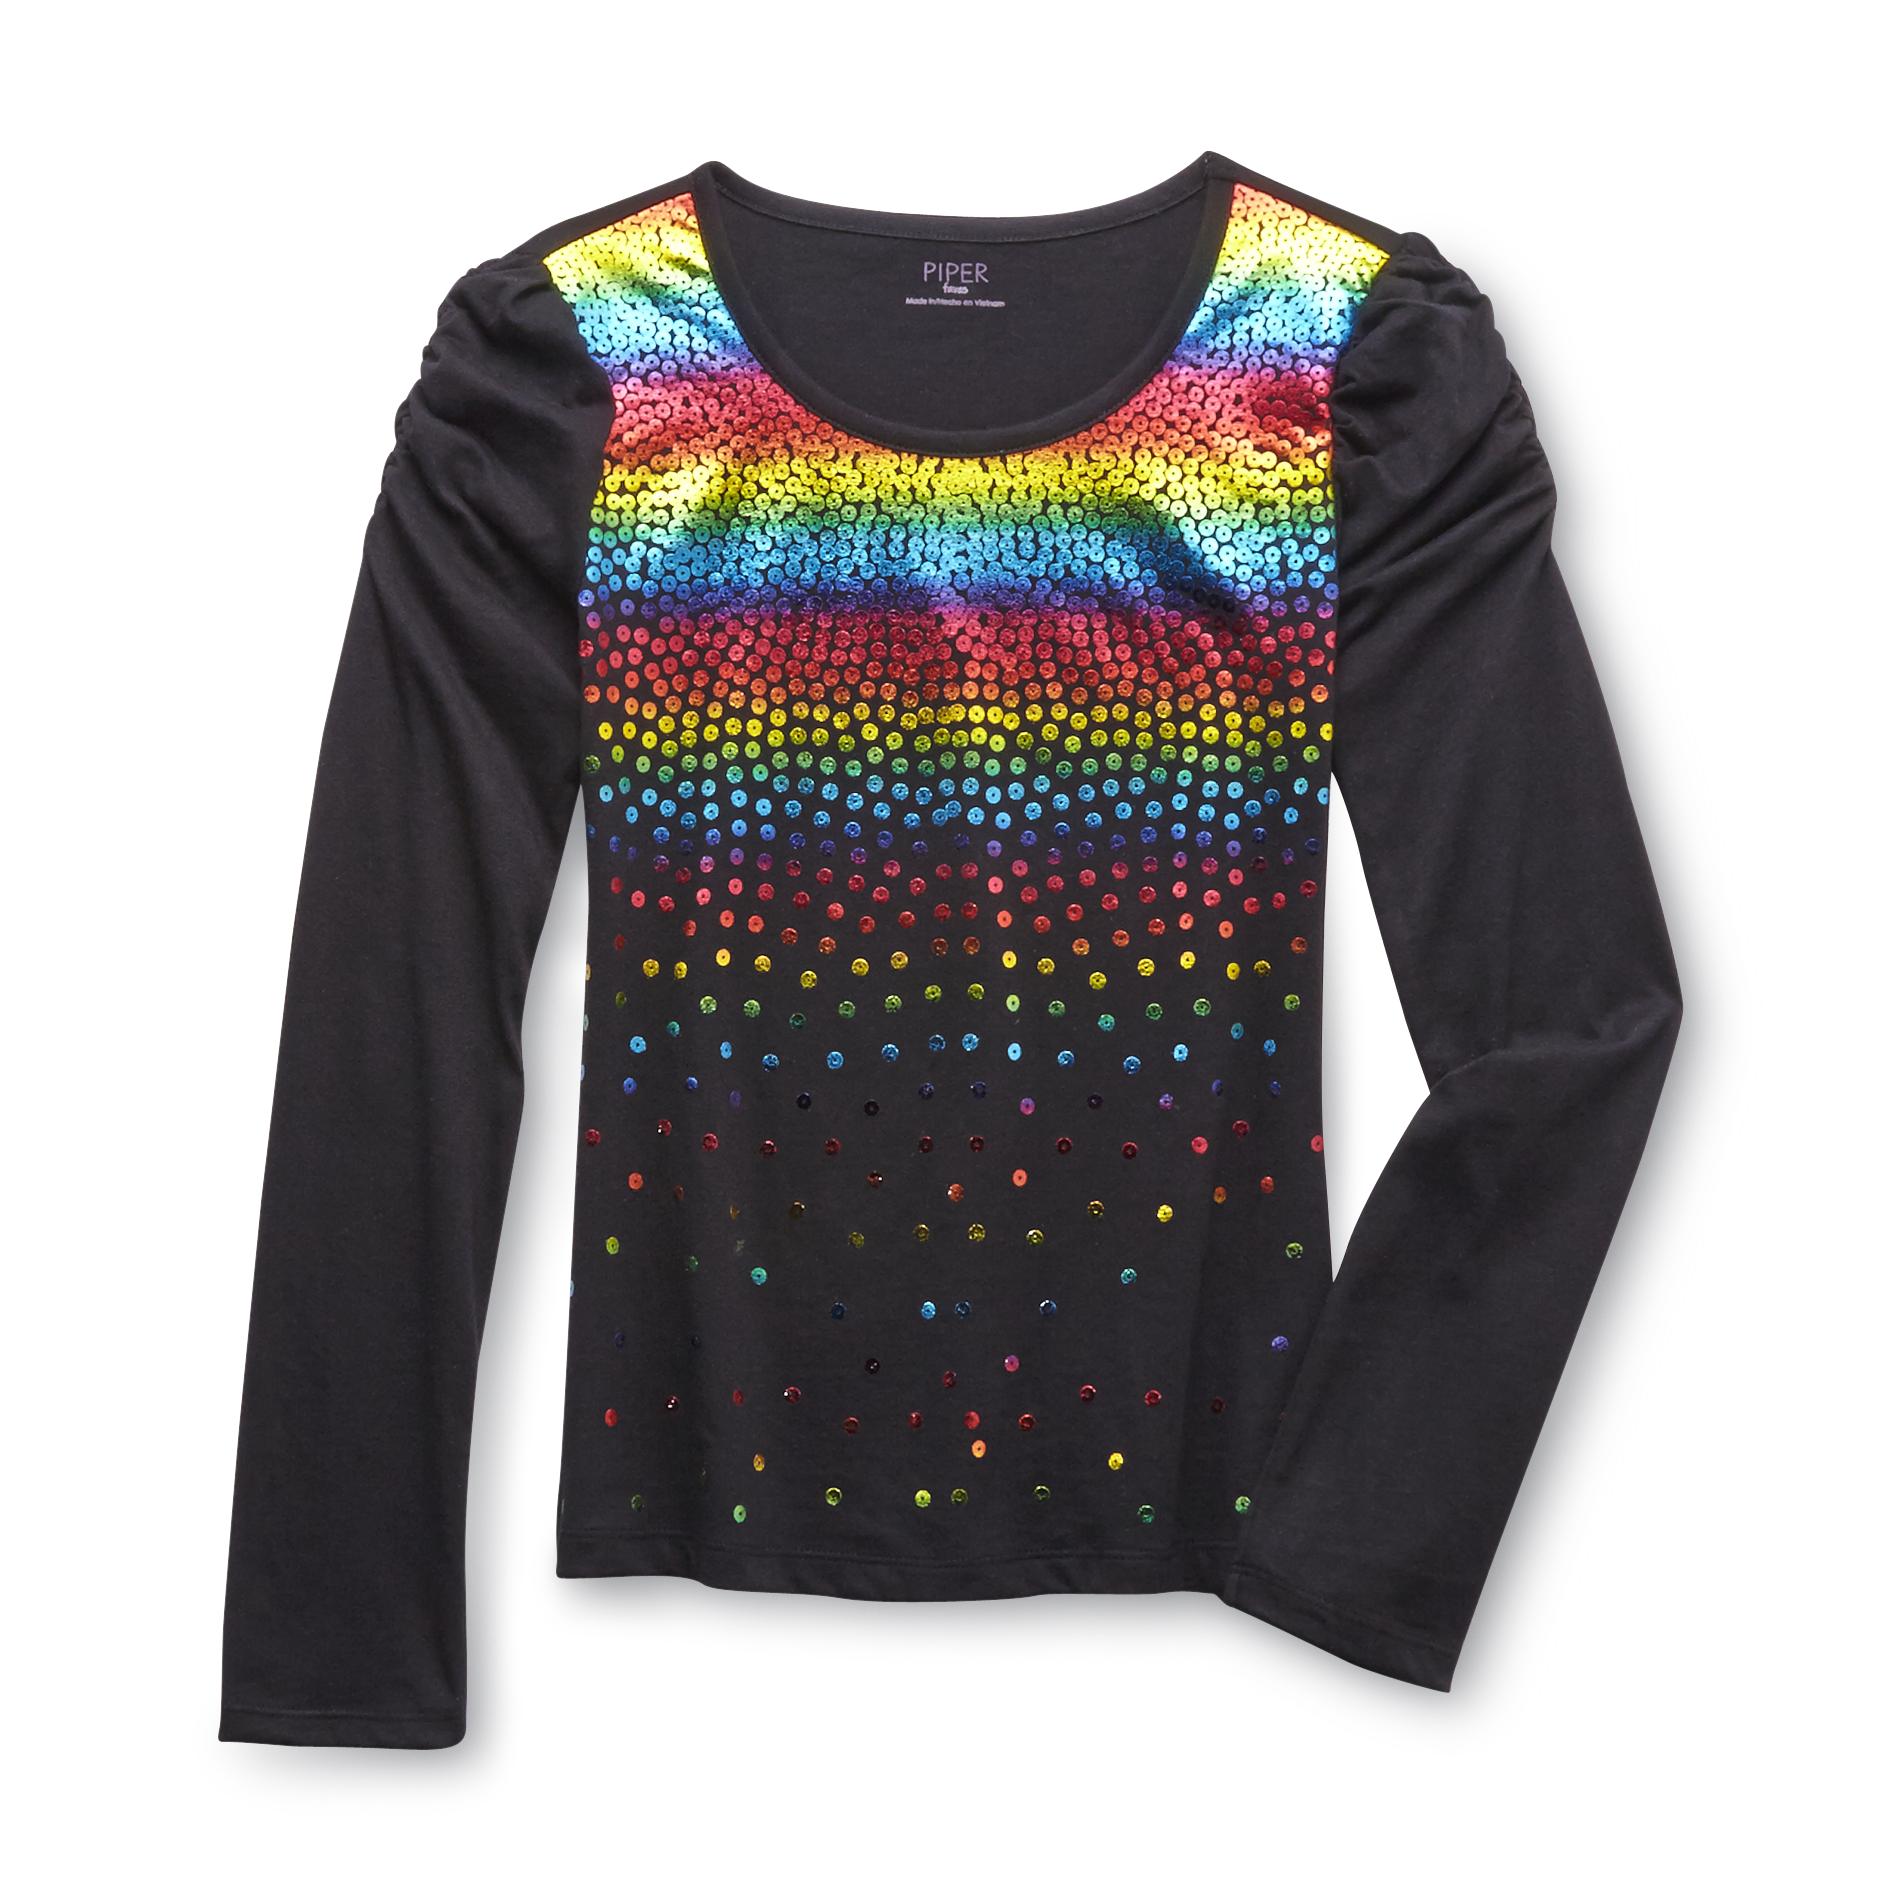 Piper Faves Girl's Foil-Print Long-Sleeve Top - Rainbow Colored